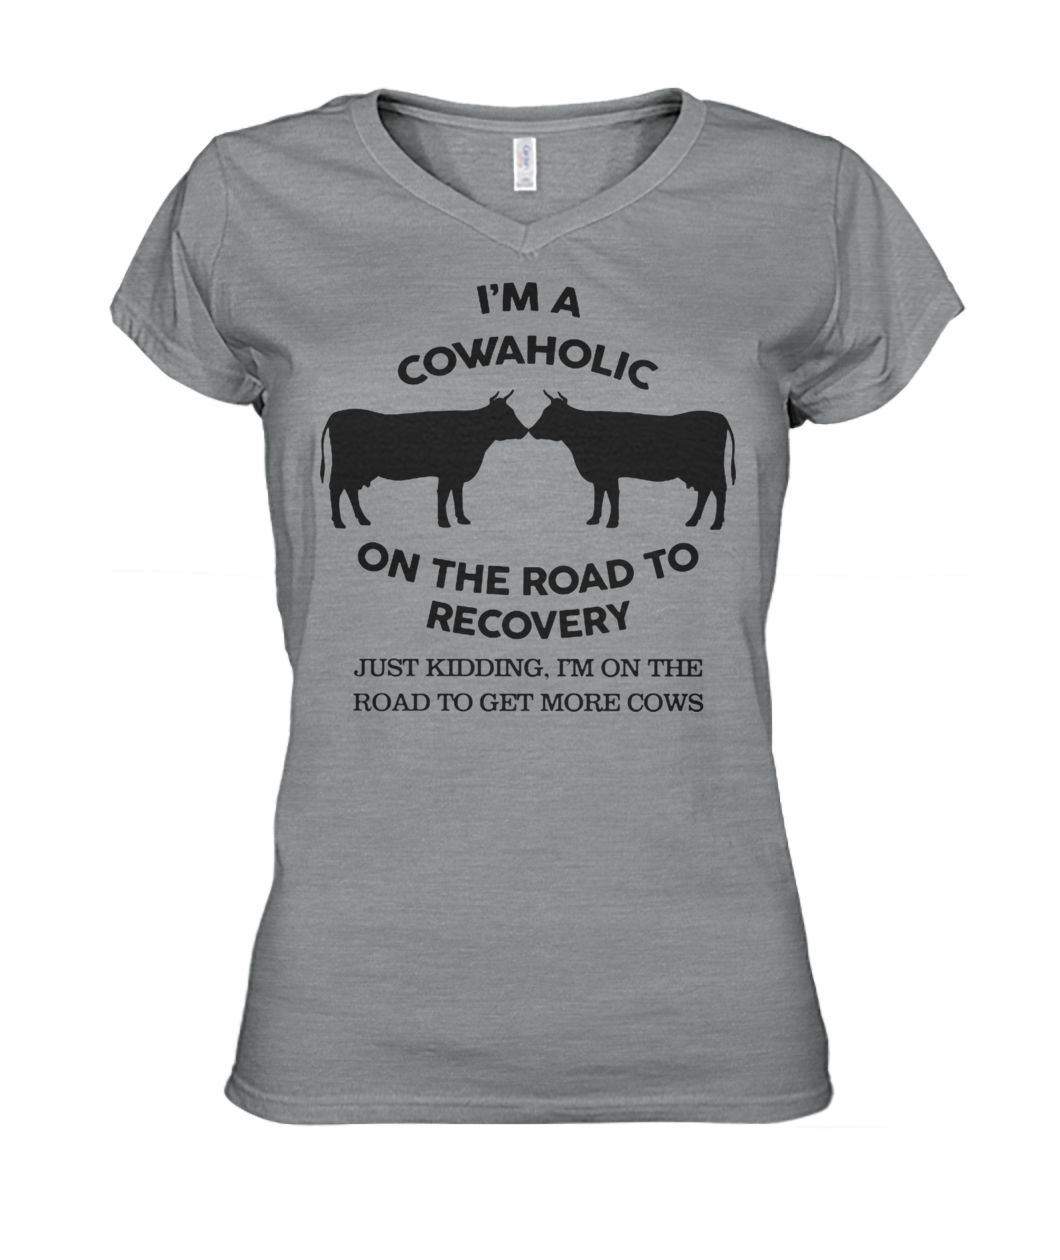 I'm a cowaholic on the road to recovery women's v-neck